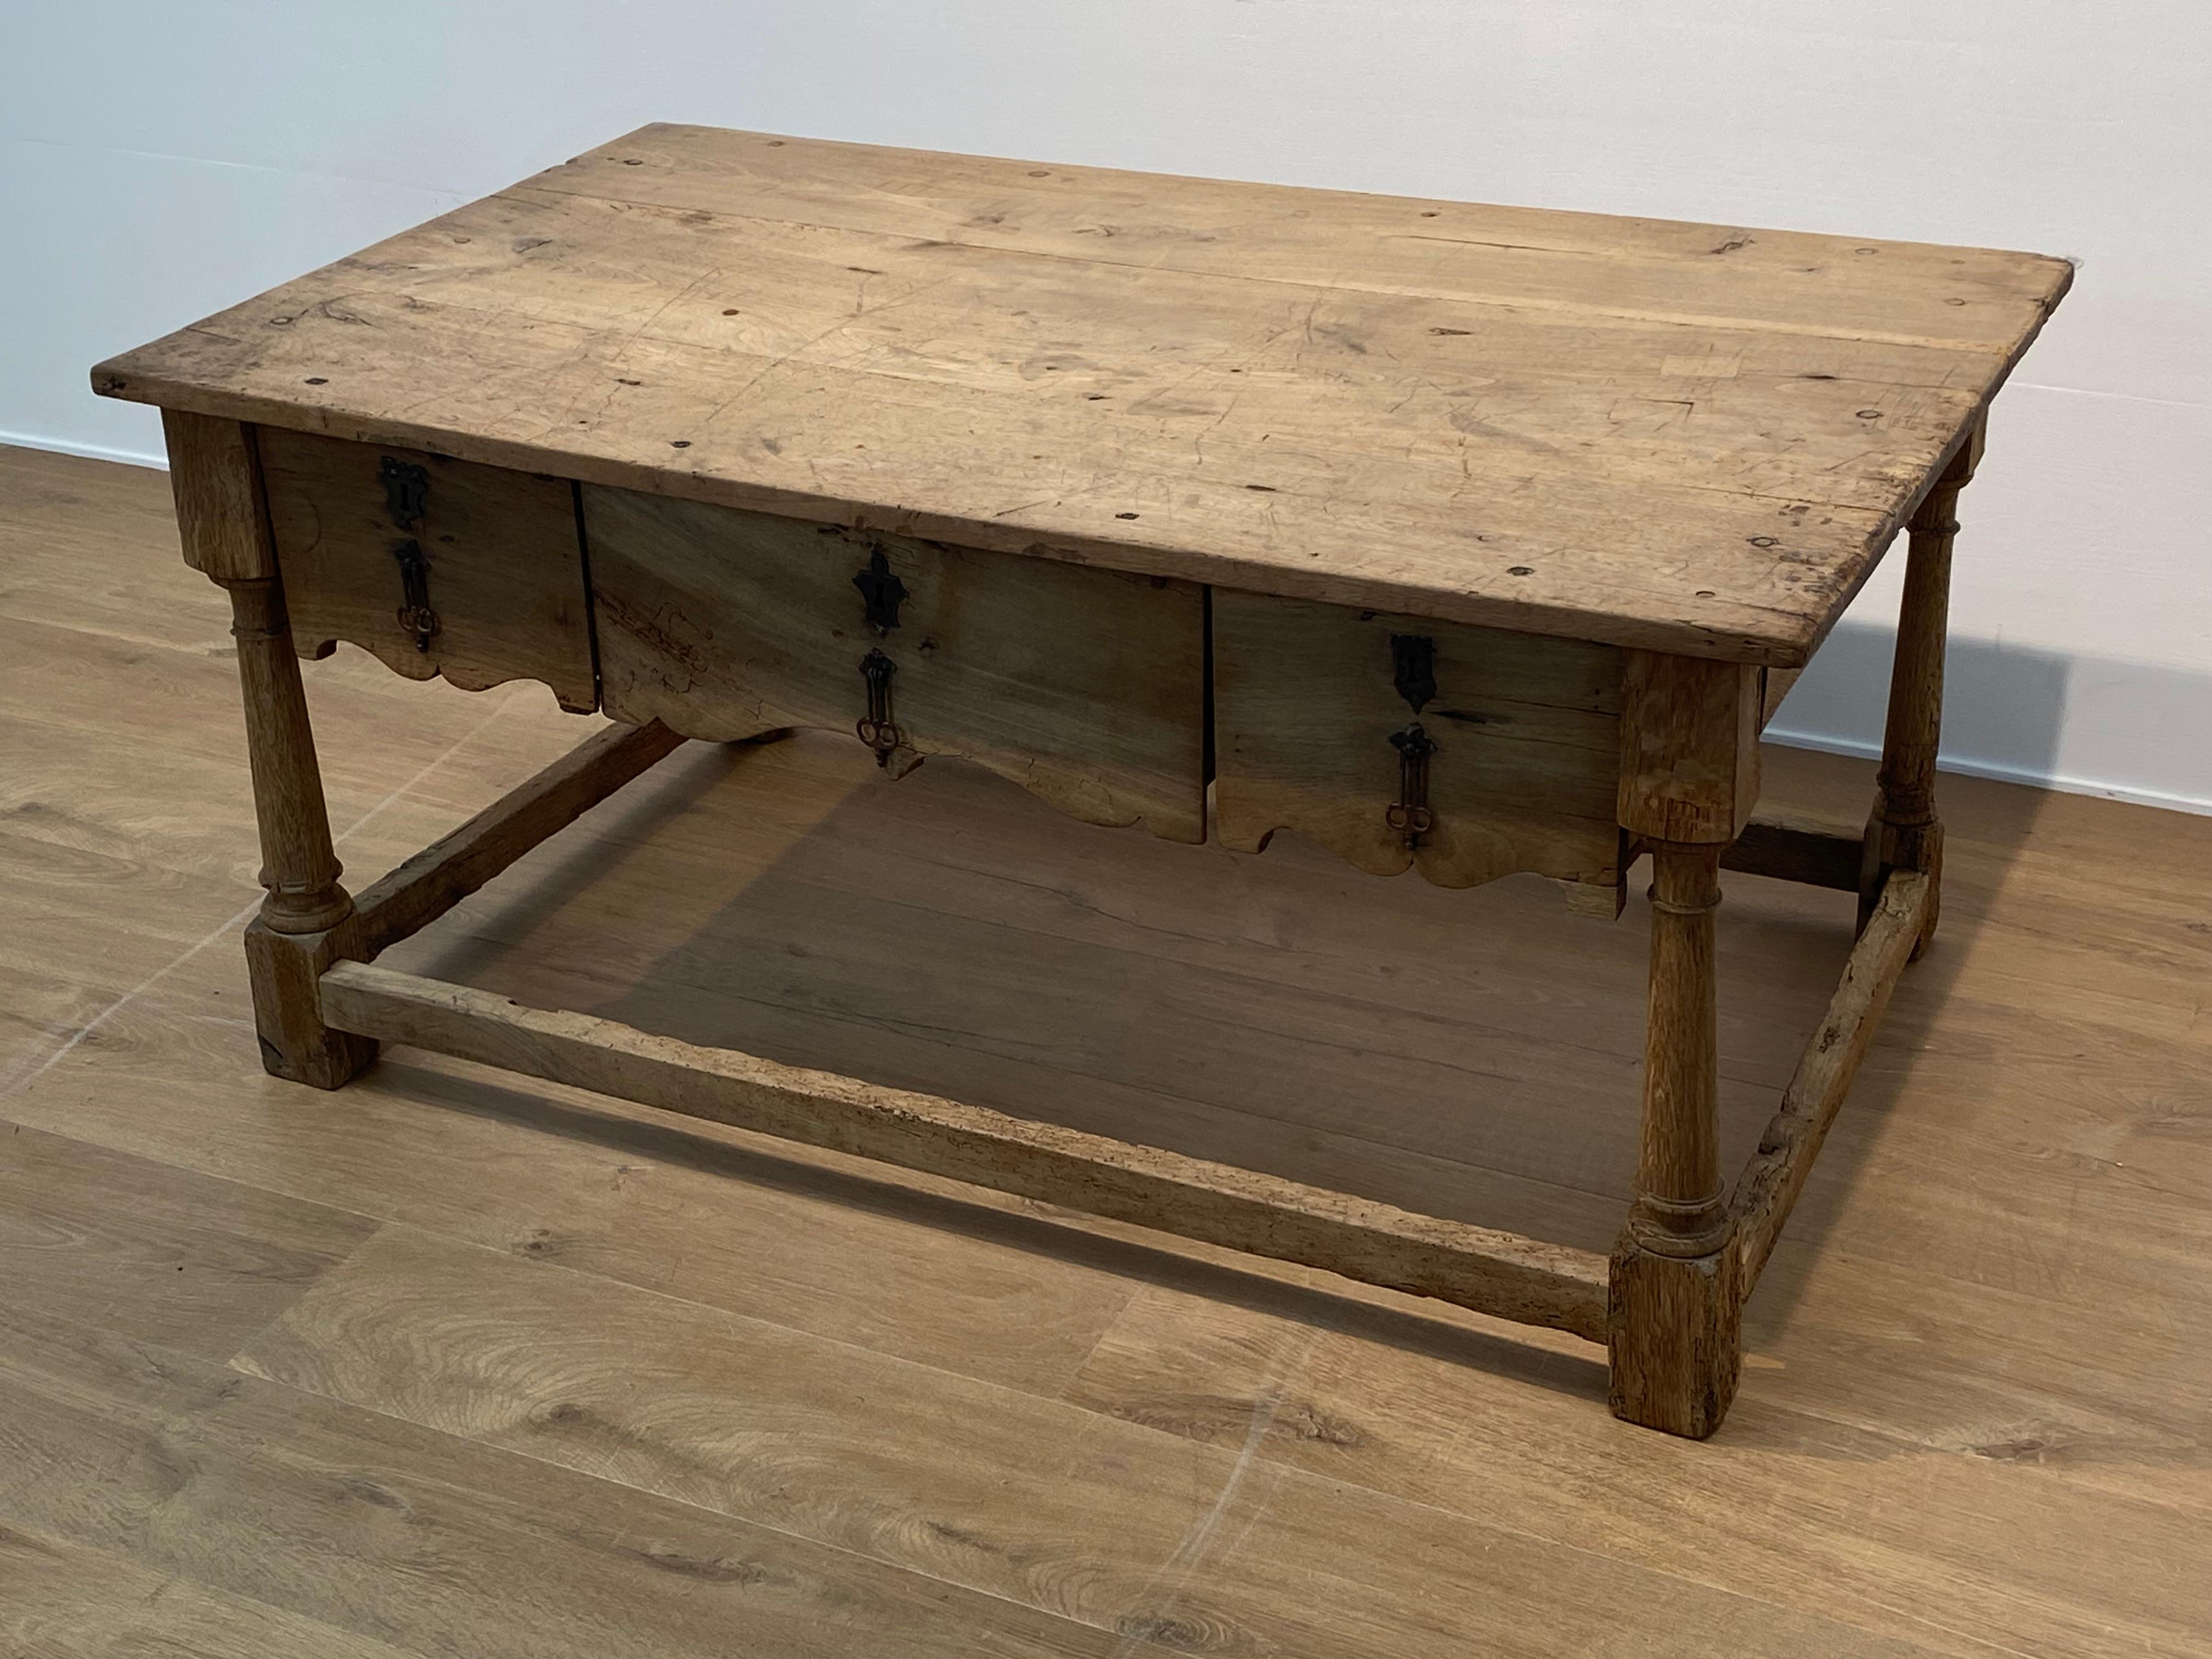 Antique Spanish Low Table with 3 drawers in Walnut, 18 th Century In Good Condition For Sale In Schellebelle, BE